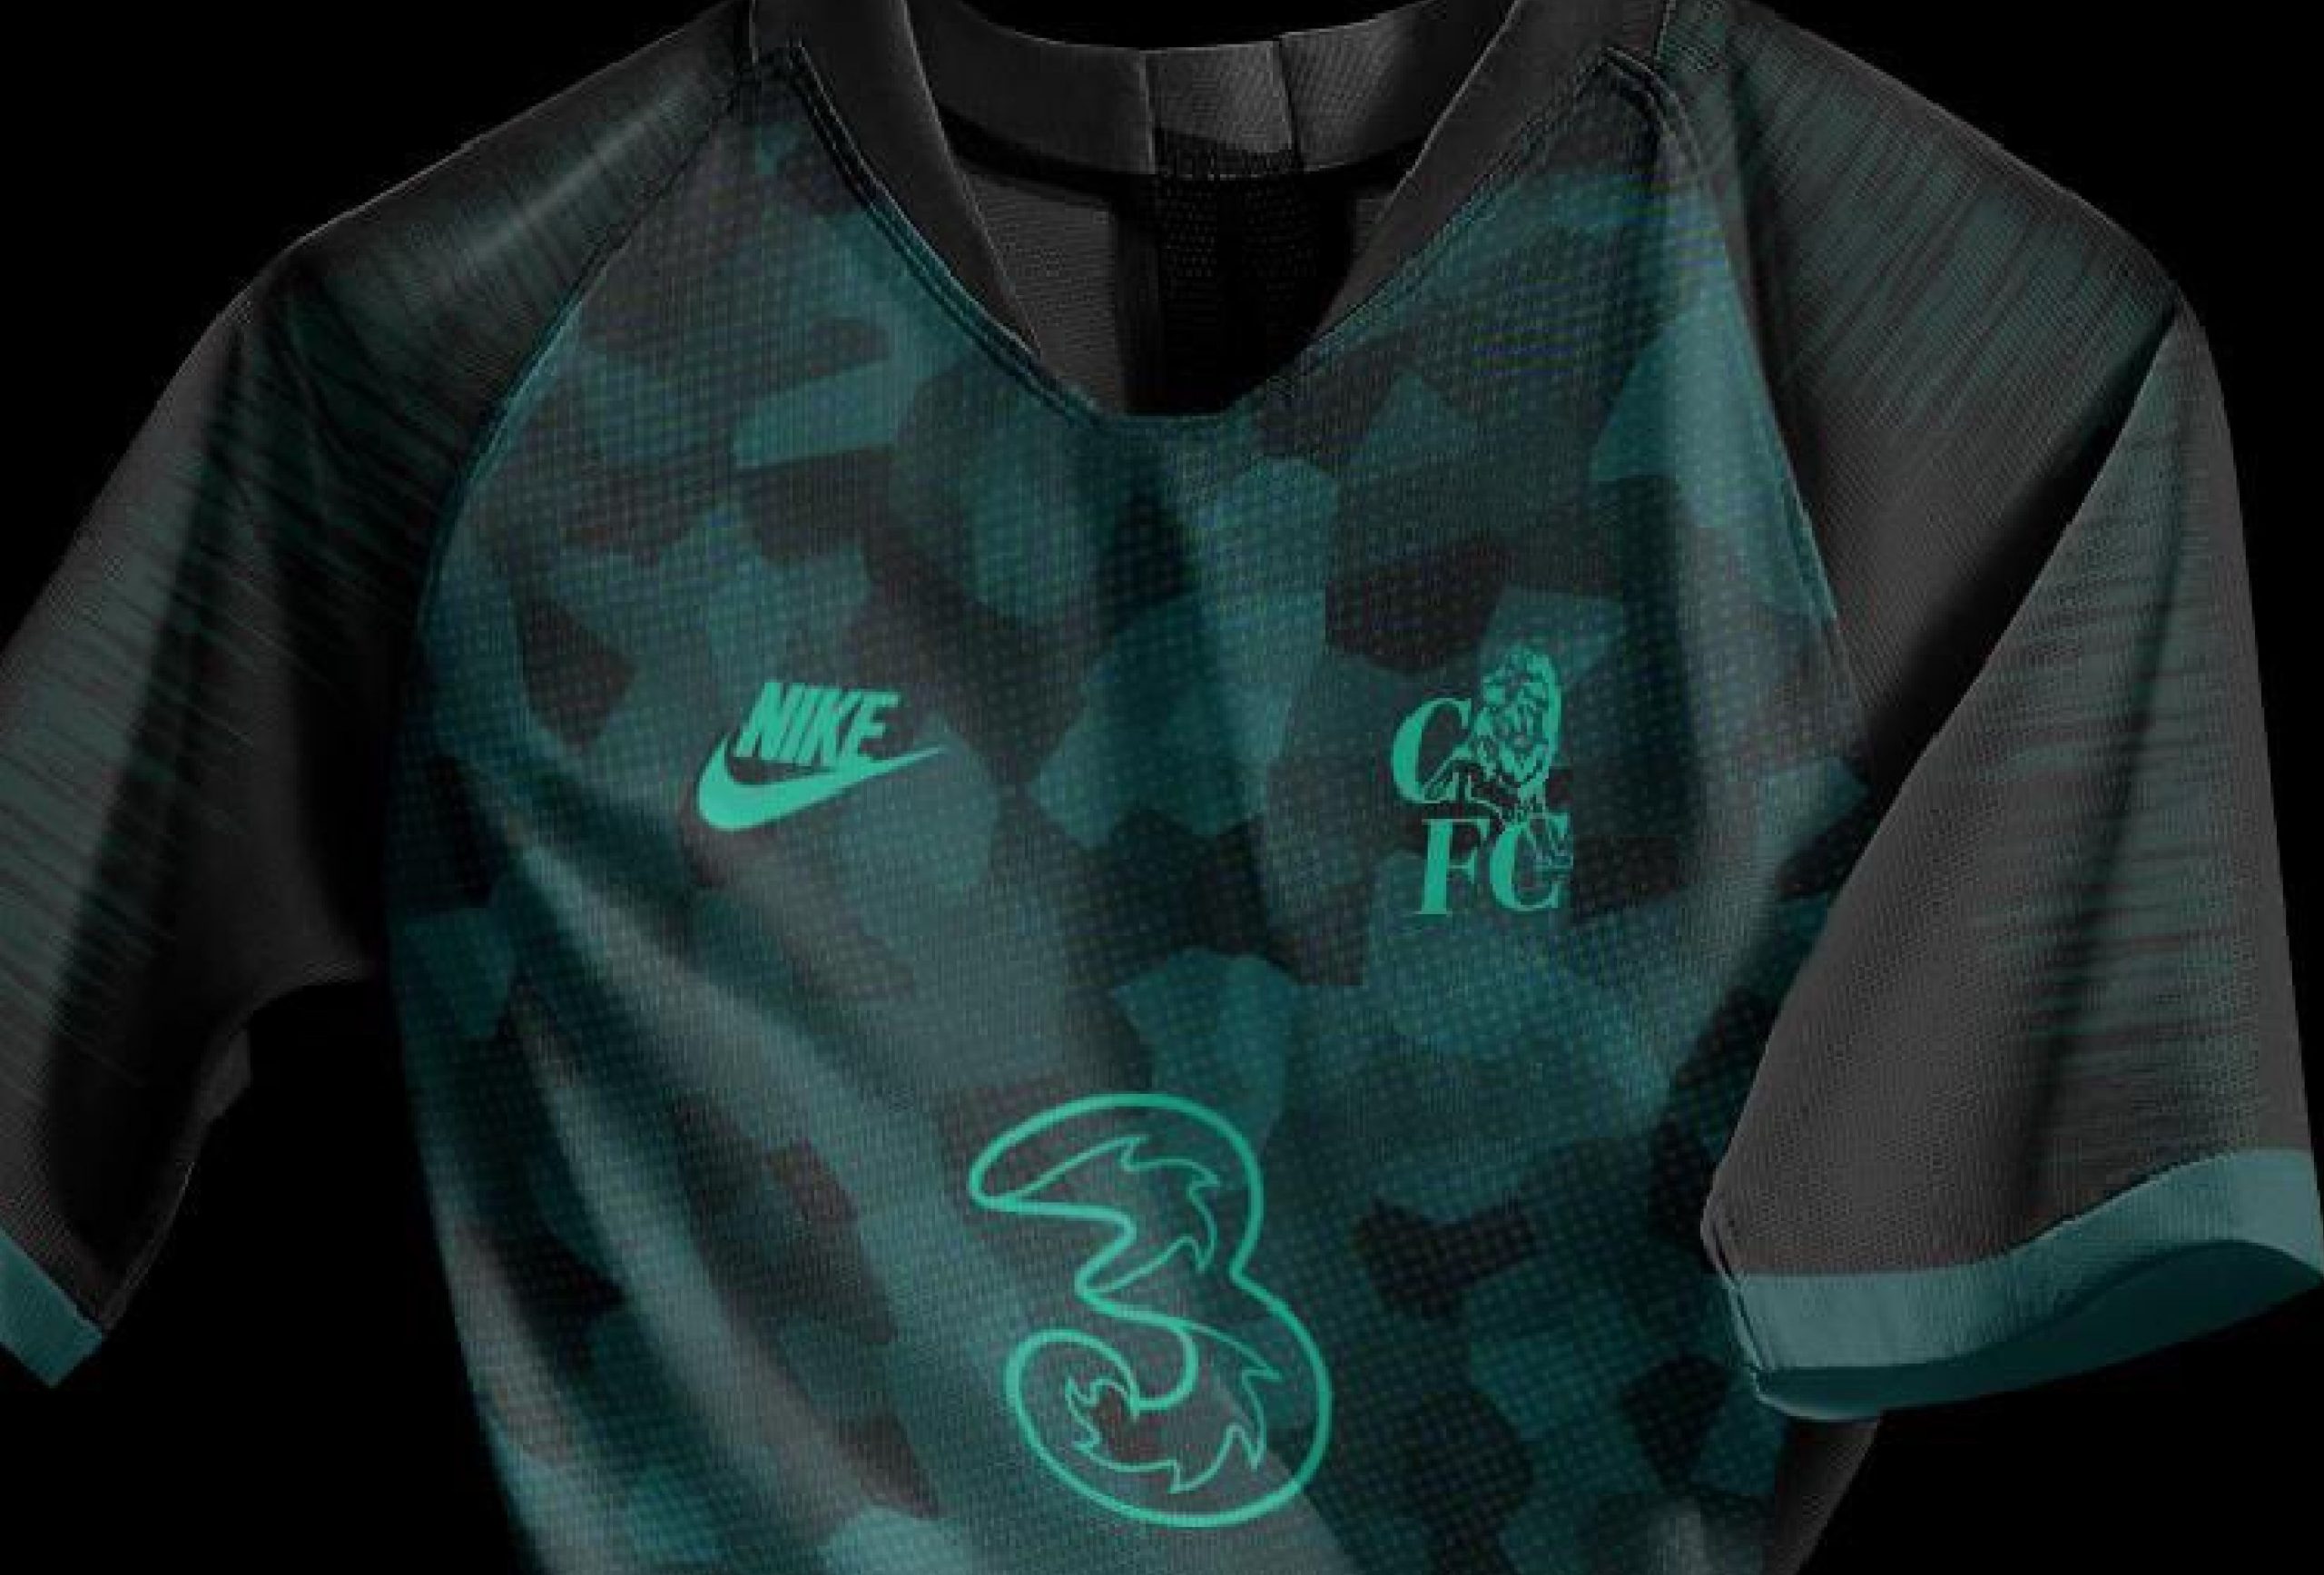 There’s a stunning concept kit in turquoise doing the rounds among Chelsea fans